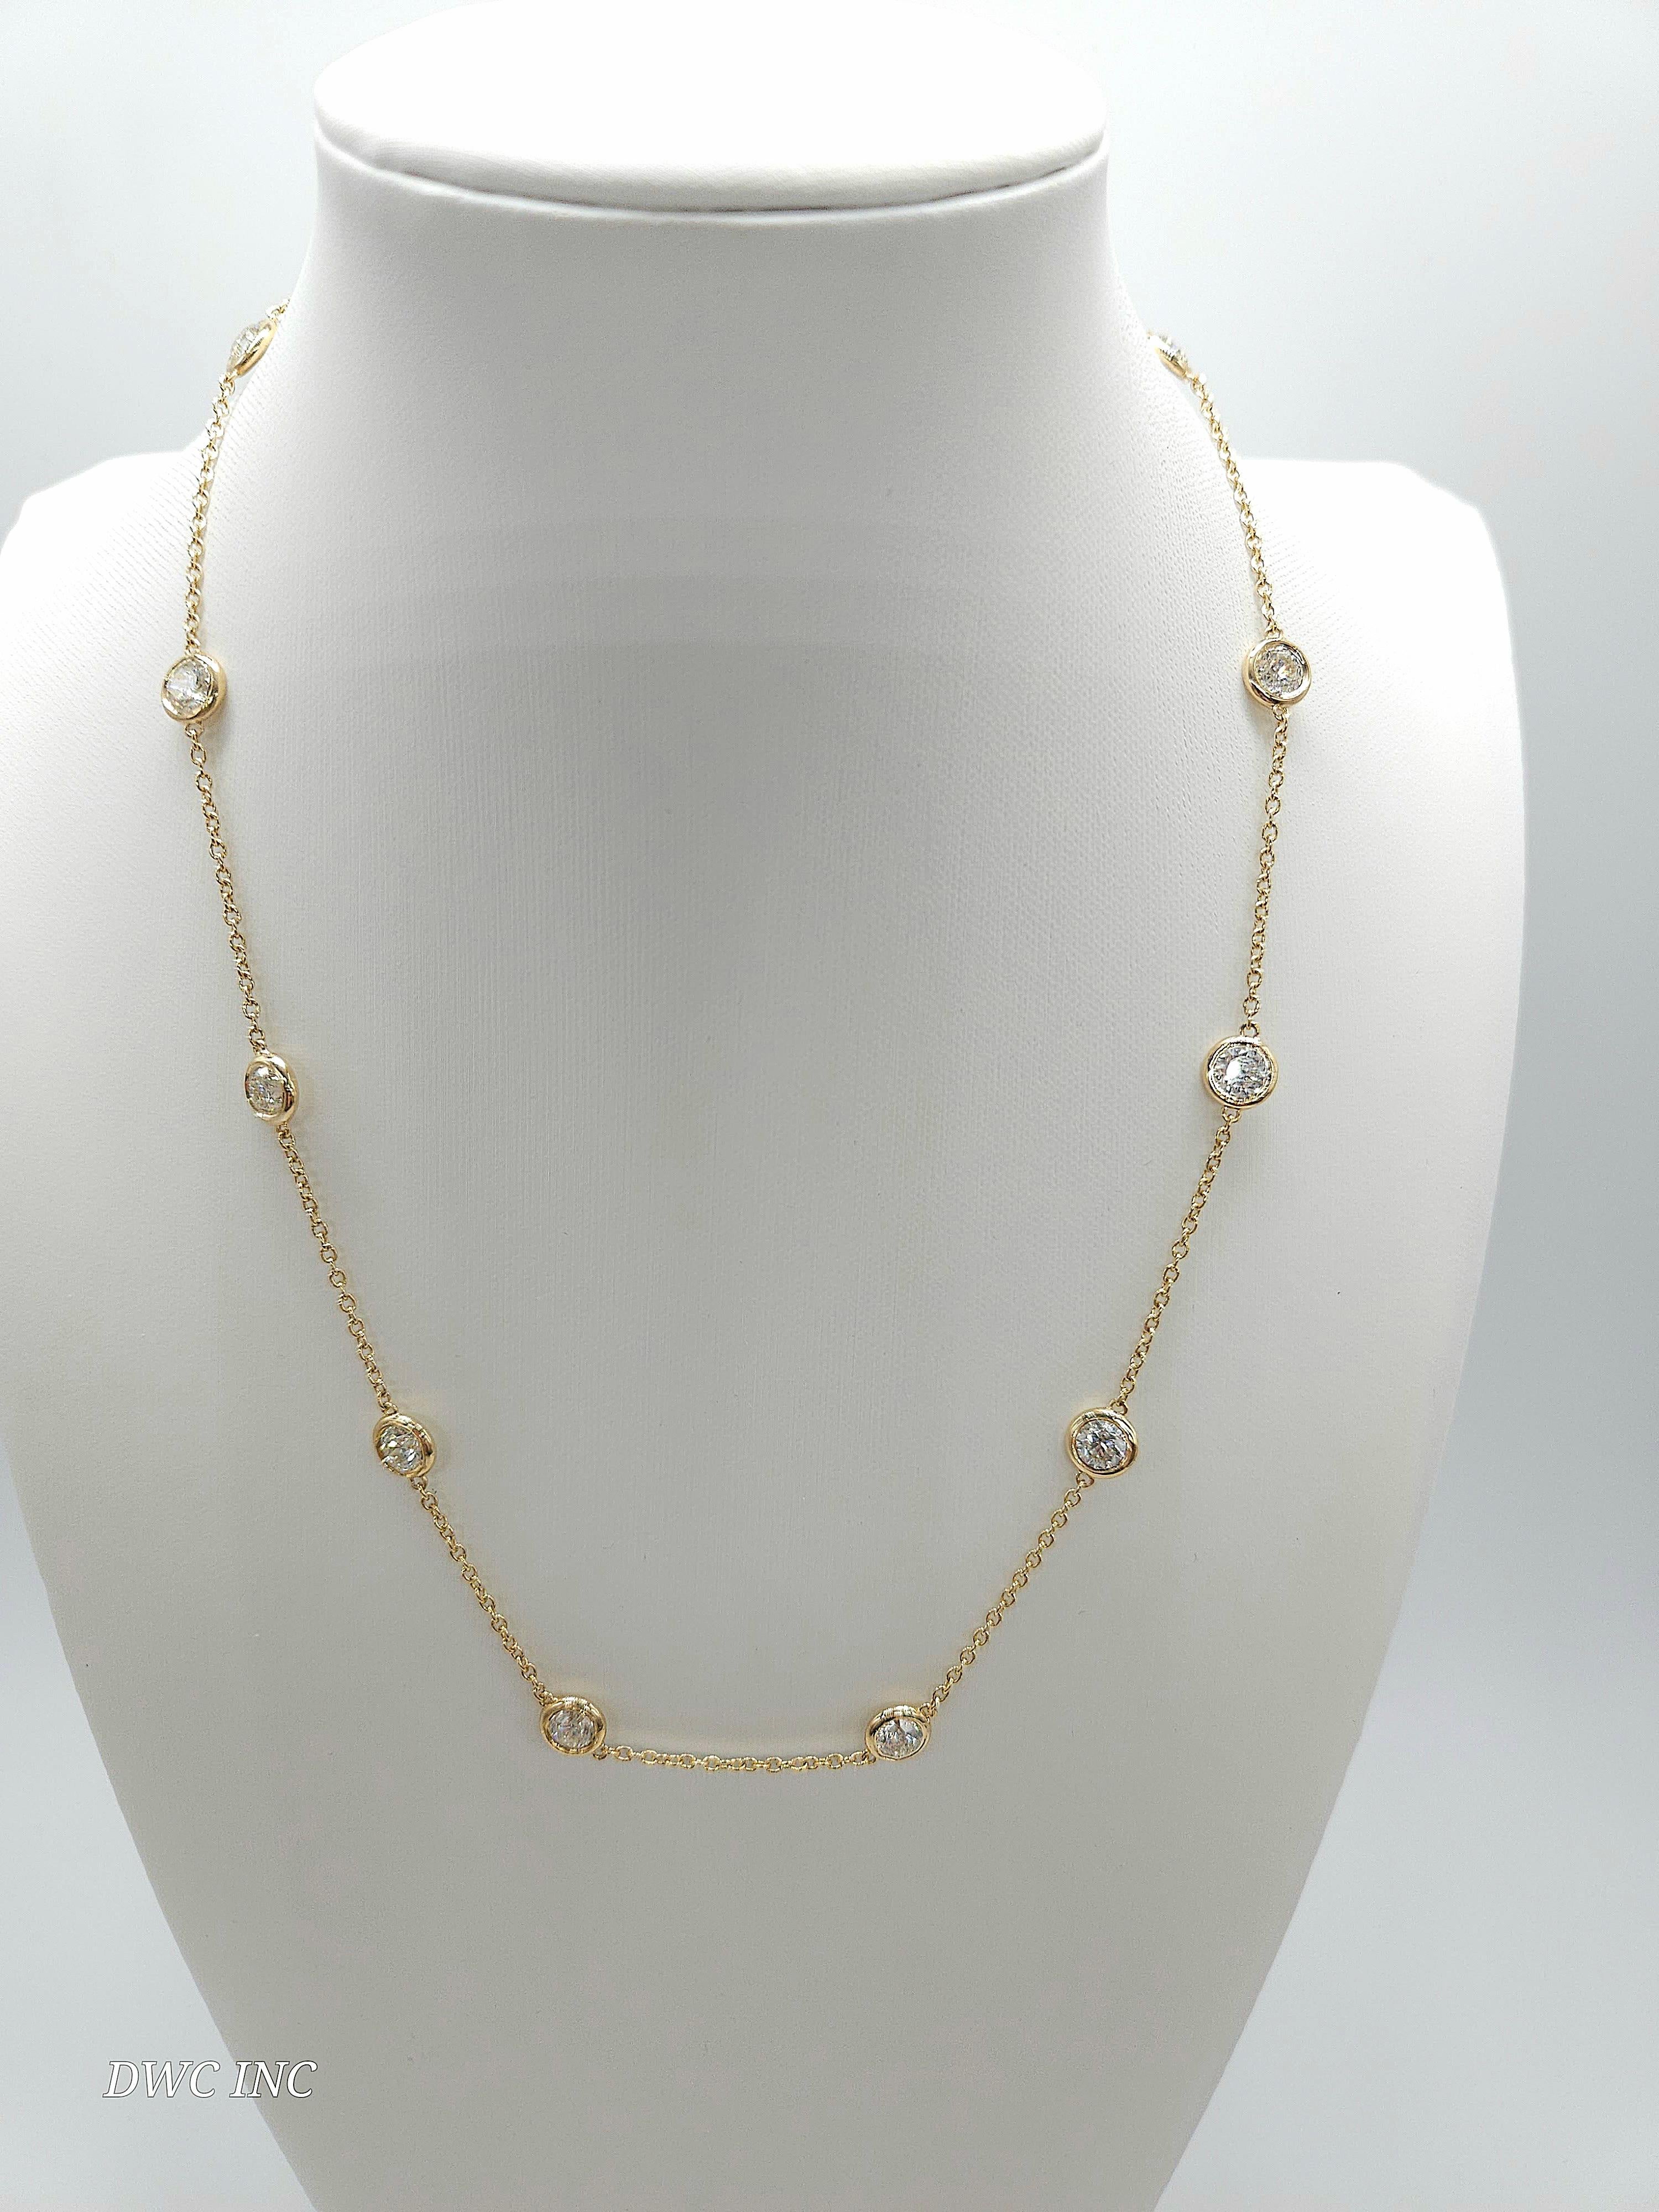 10 Station Diamond by the yard necklace set in Italian made 14K yellow gold. 
Total weight is 4.23 carats. Beautiful shiny stones. 
Length 16 inch 6.47 grams. Average H-VS

*Free shipping within U.S*